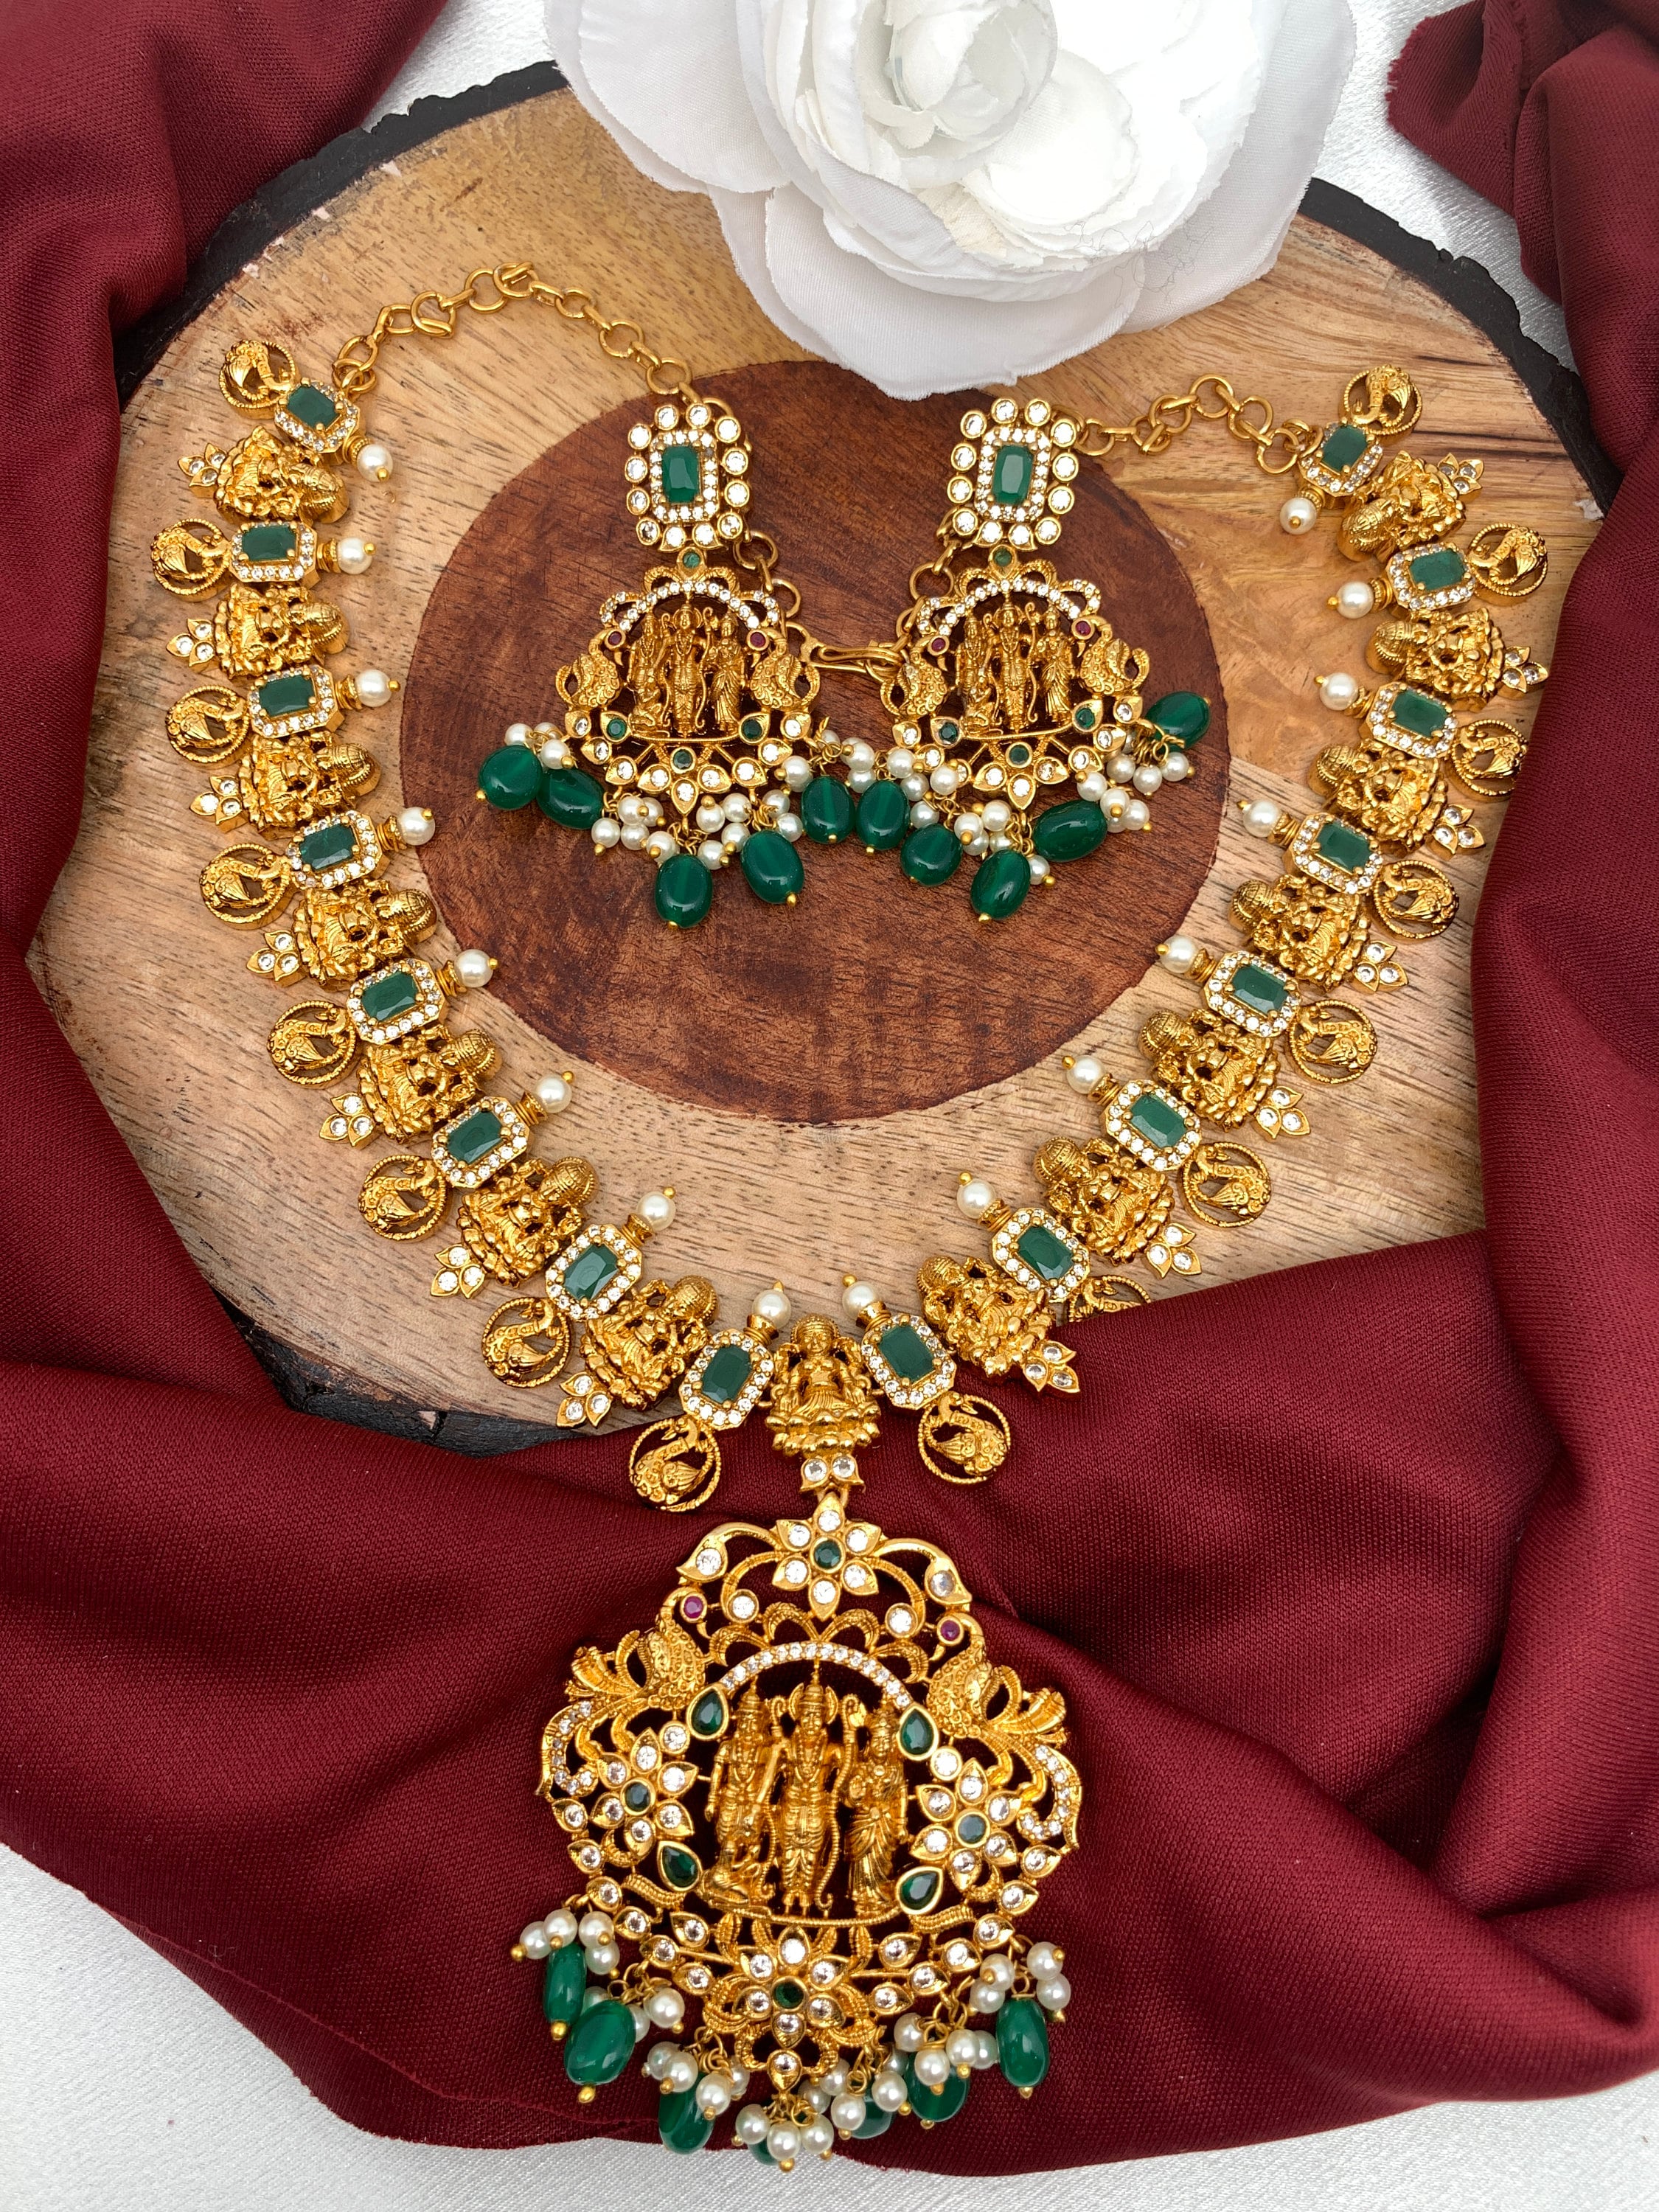 22 Carat gold antique necklace with Ram Parivar pendant adorned with  pearls, emerald beads … | Temple jewellery earrings, Gold bride jewelry,  Antique bridal jewelry